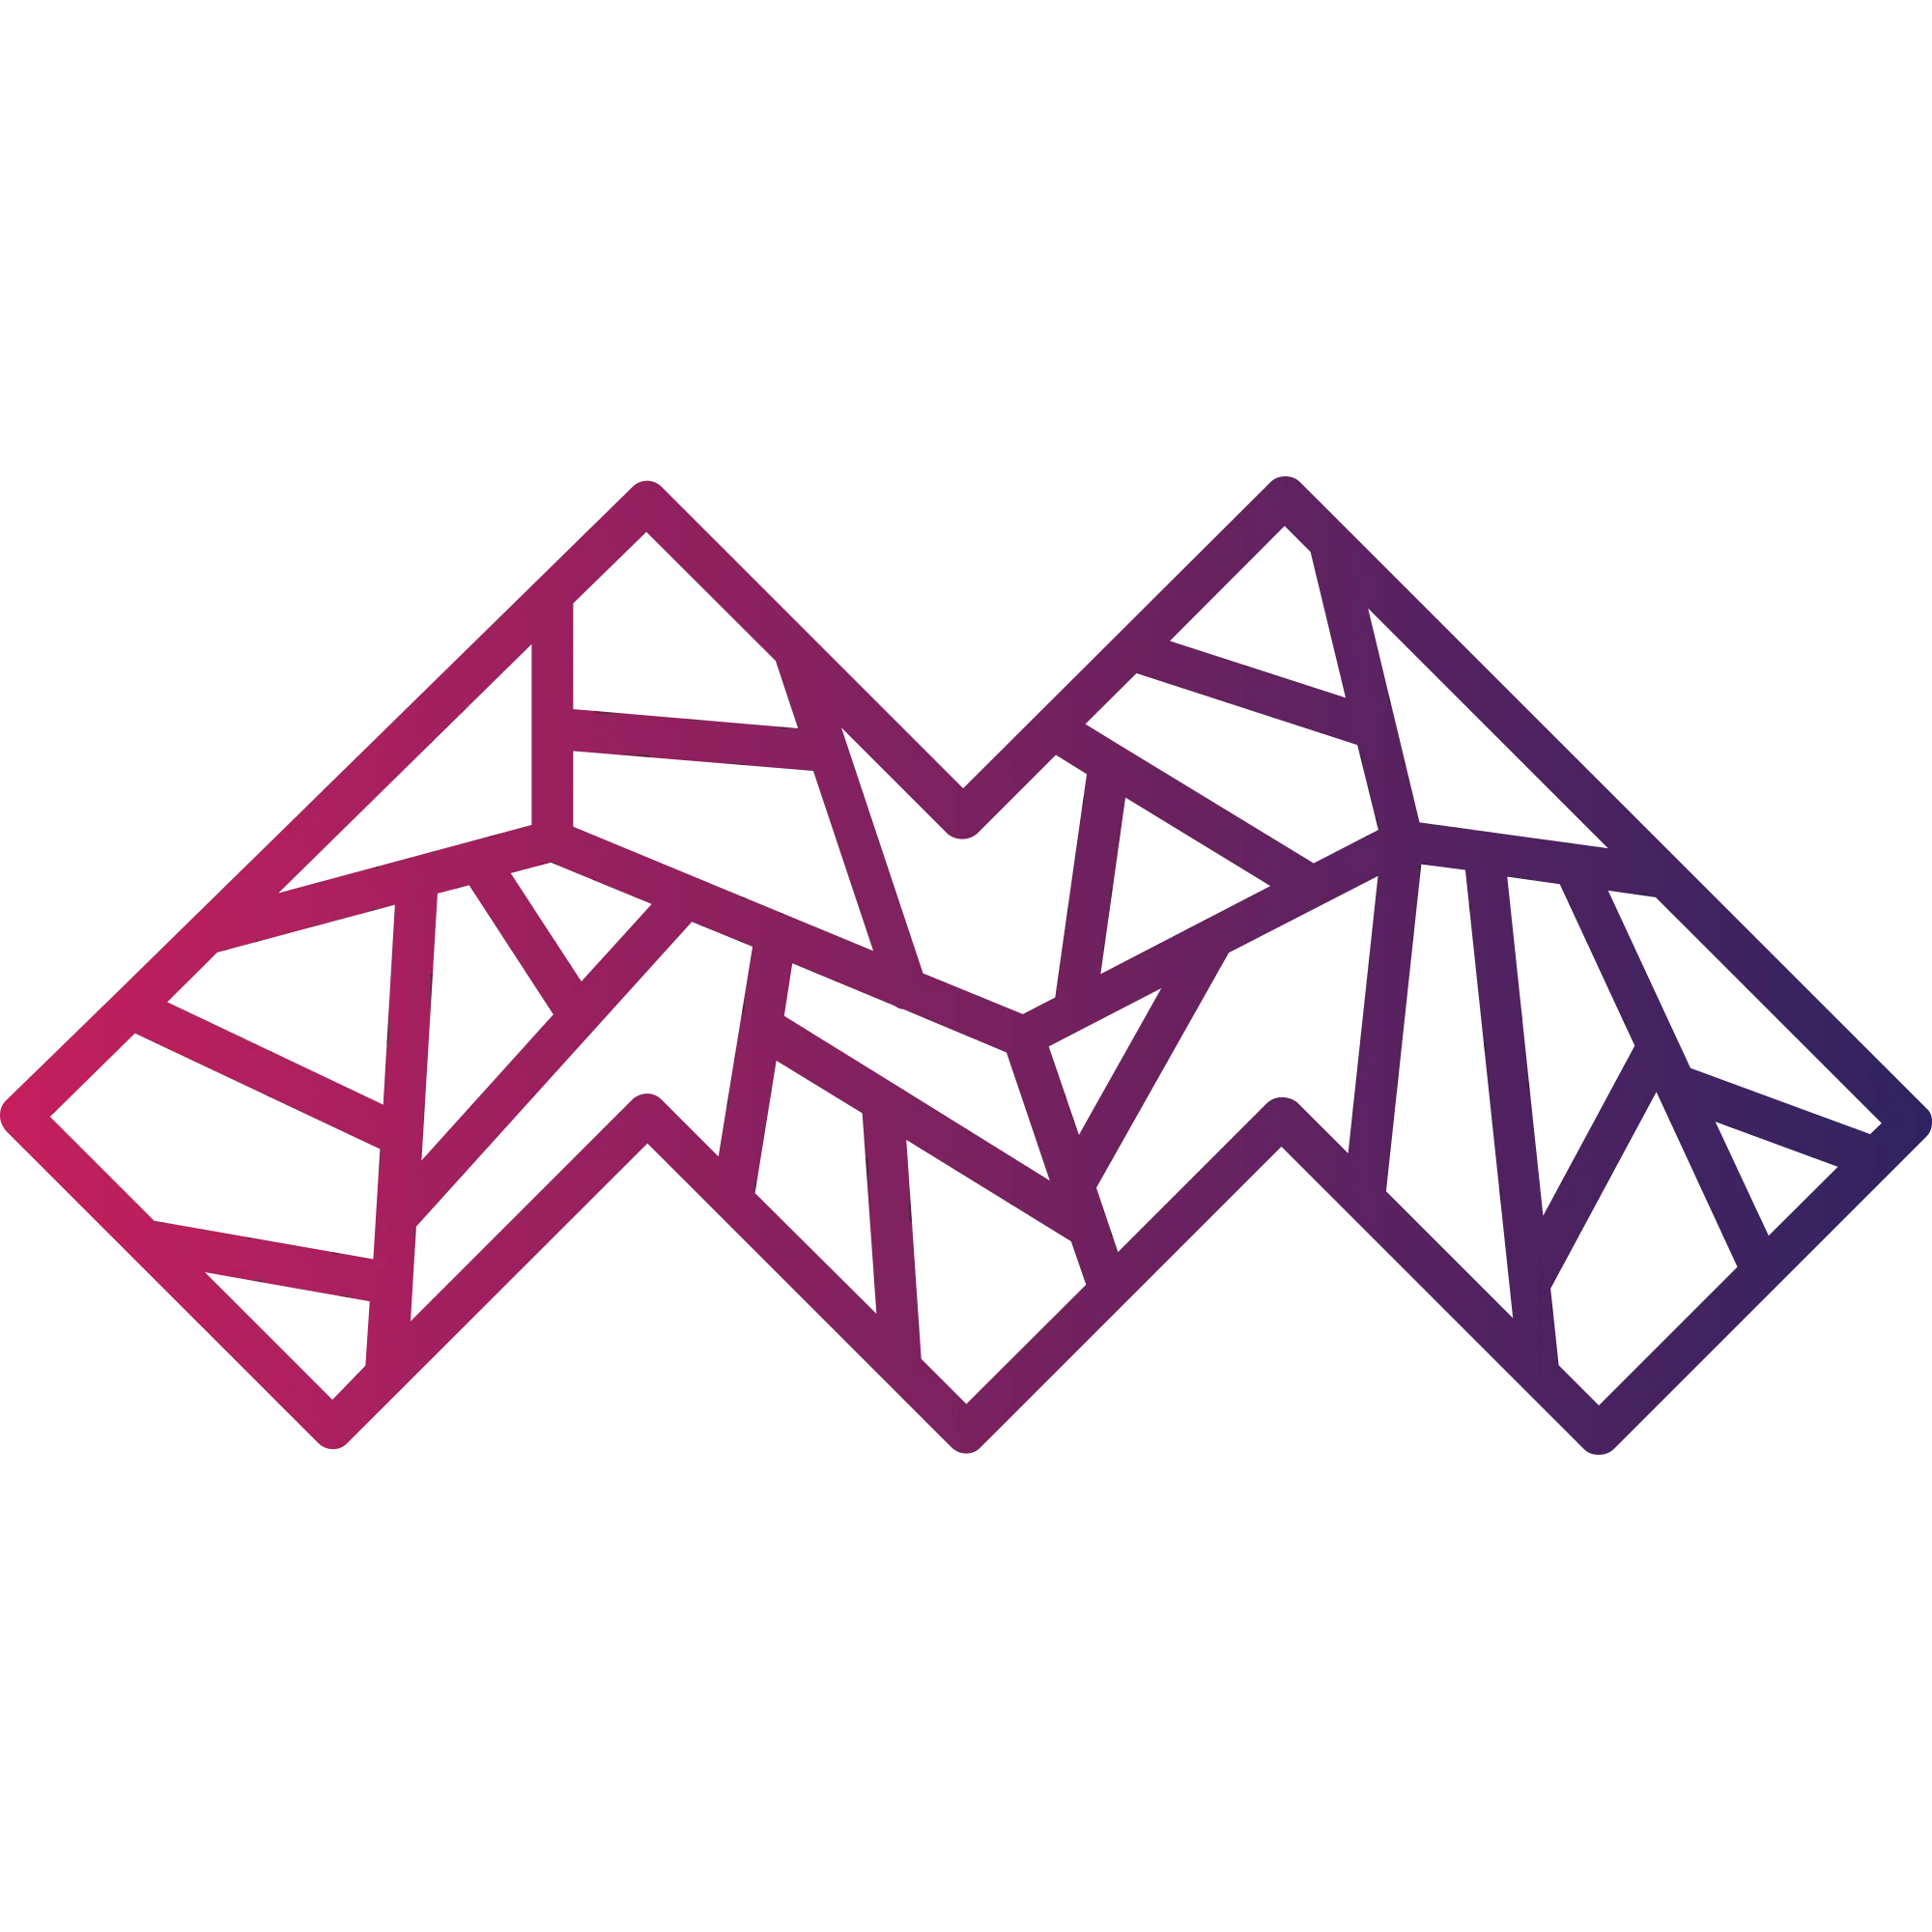 Mysterium logo in png format